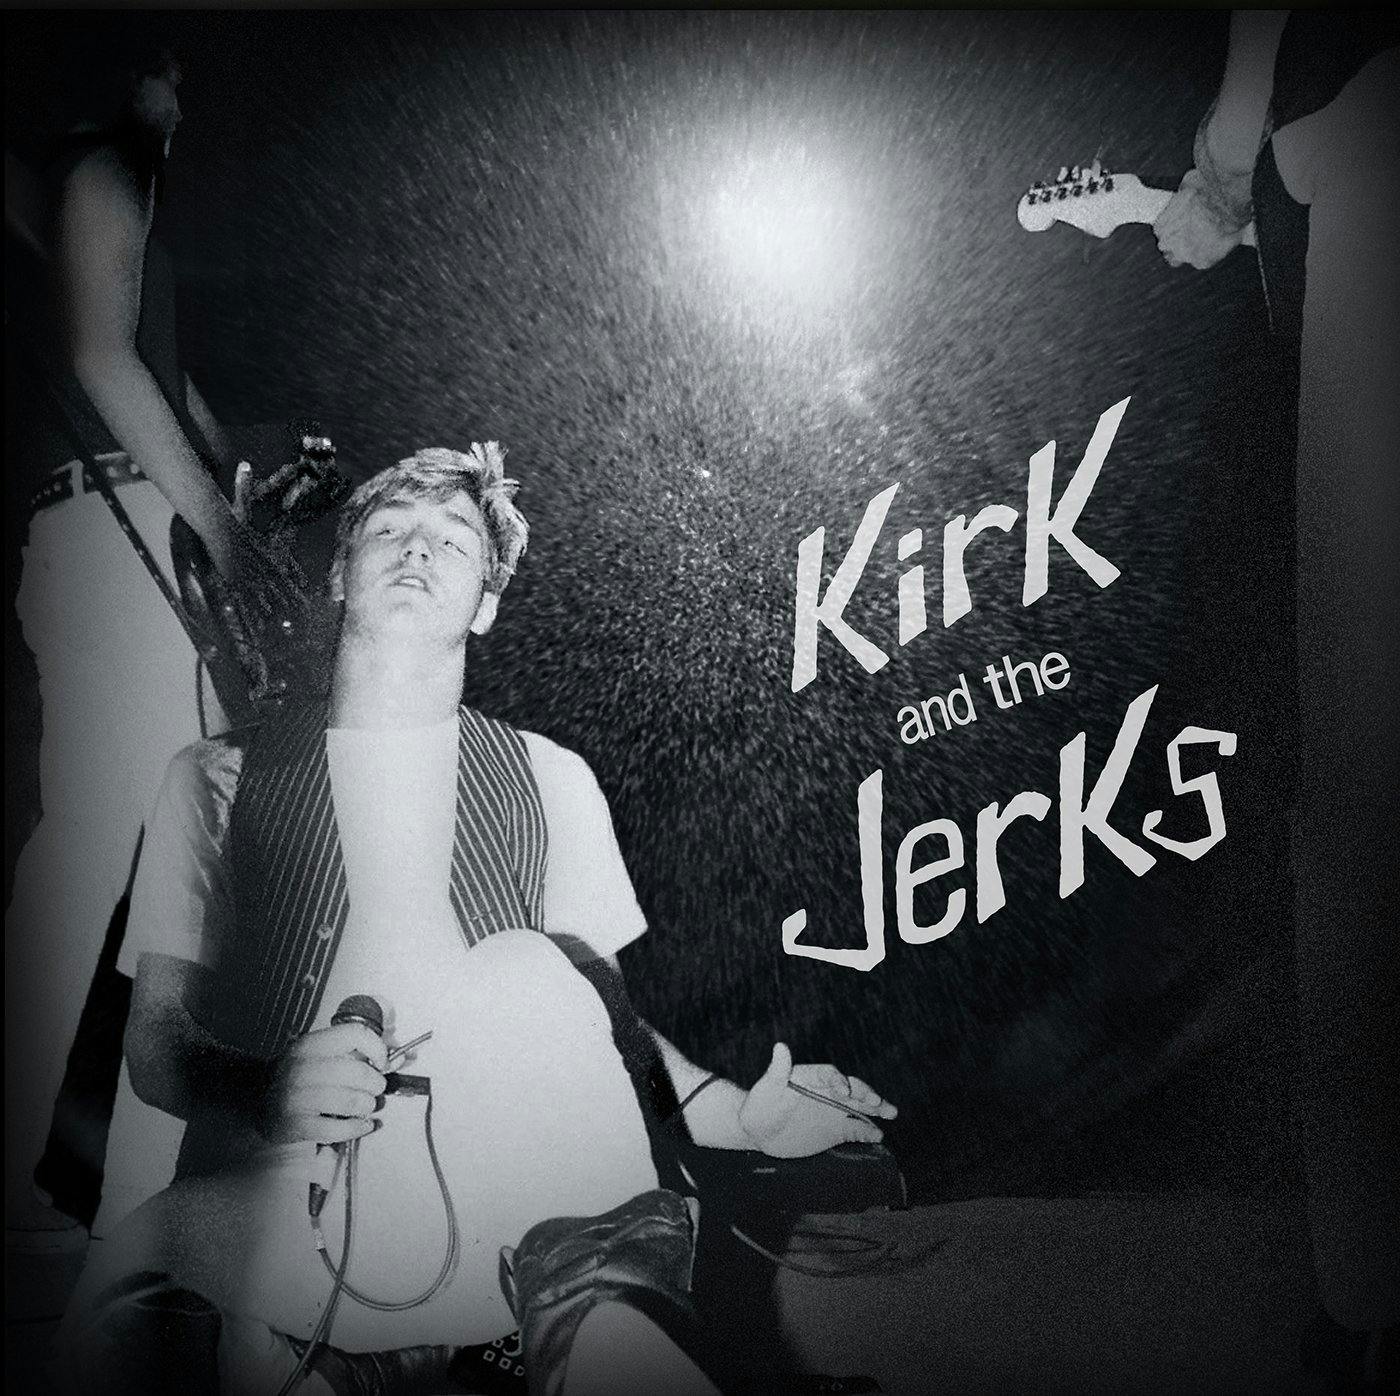 Kirk and the Jerks 